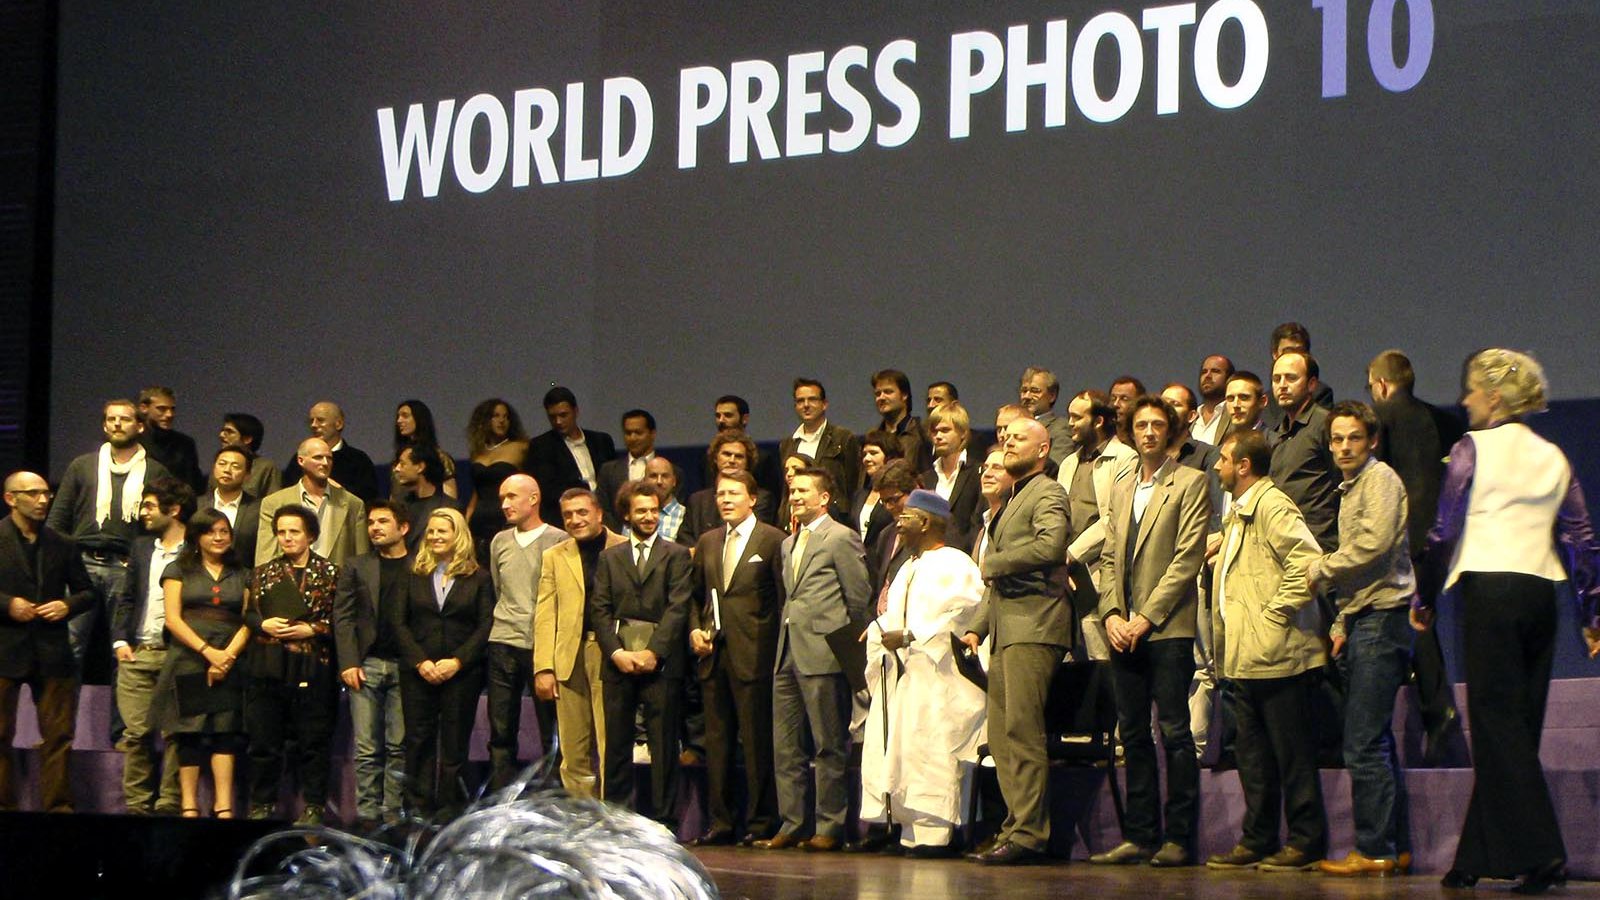 Press photo of Mark Holtzman and other World Press Photo Award Winners at the 2010 Awards Ceremony in Amsterdam